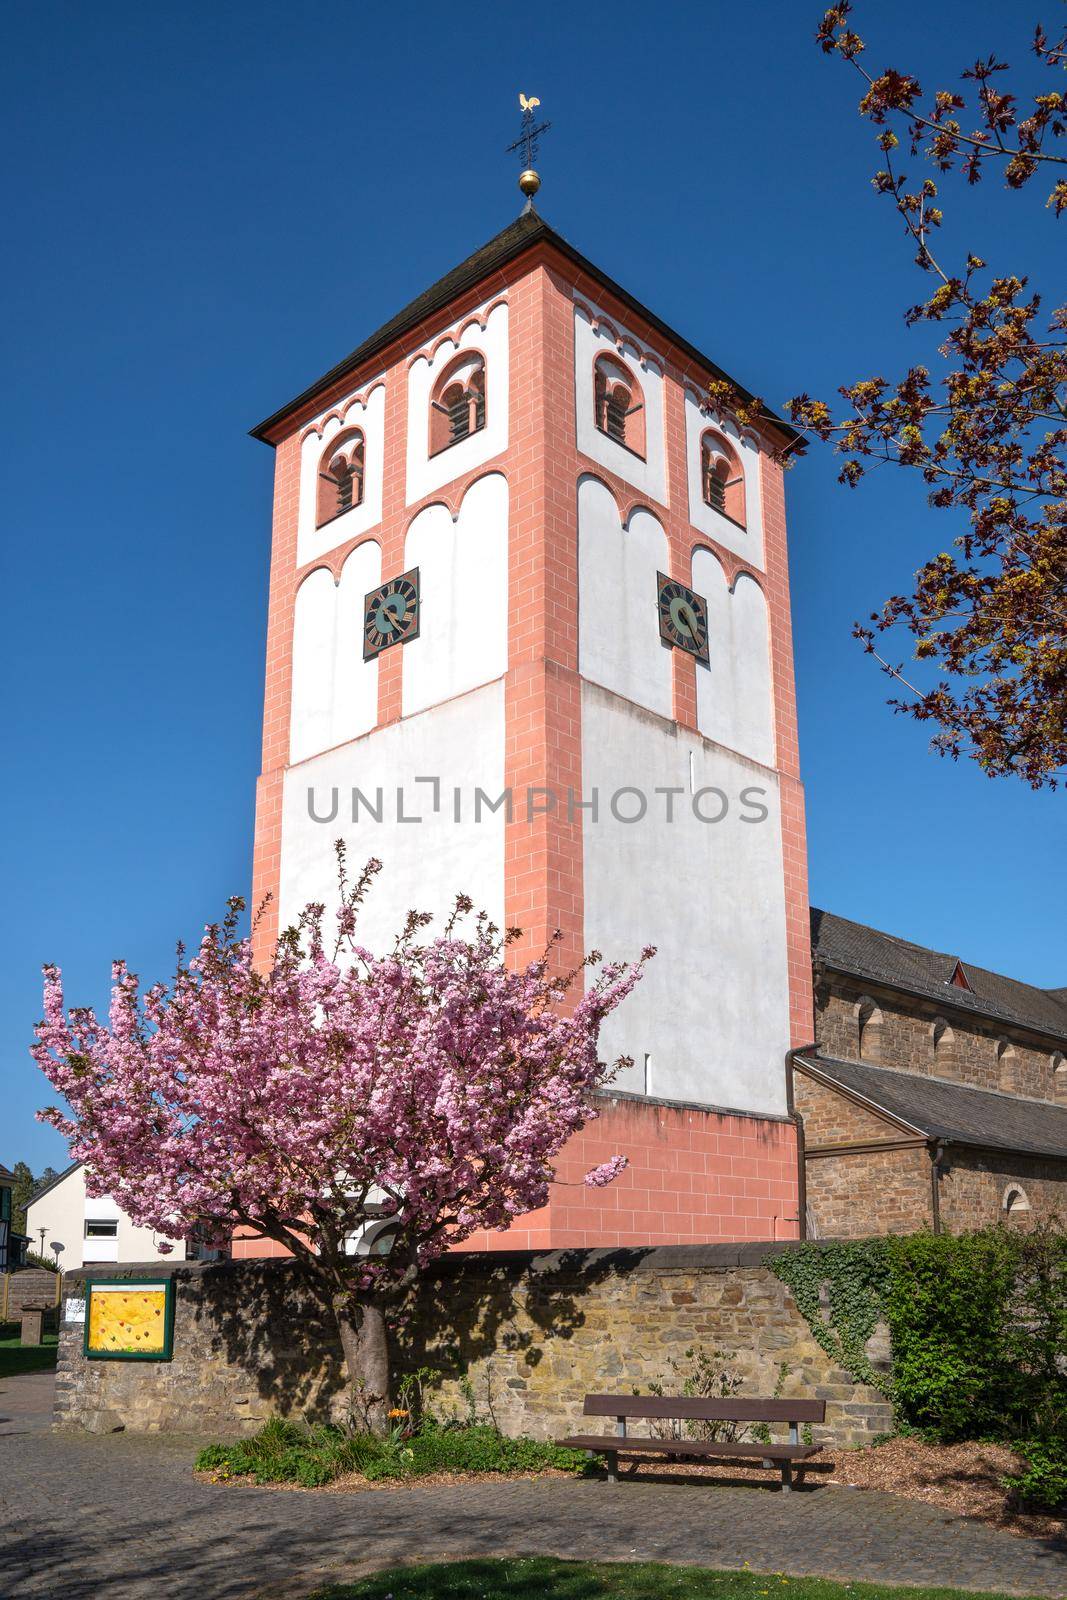 Old parish church of village Odenthal with blossoming trees at springtime, Bergisches Land, Germany